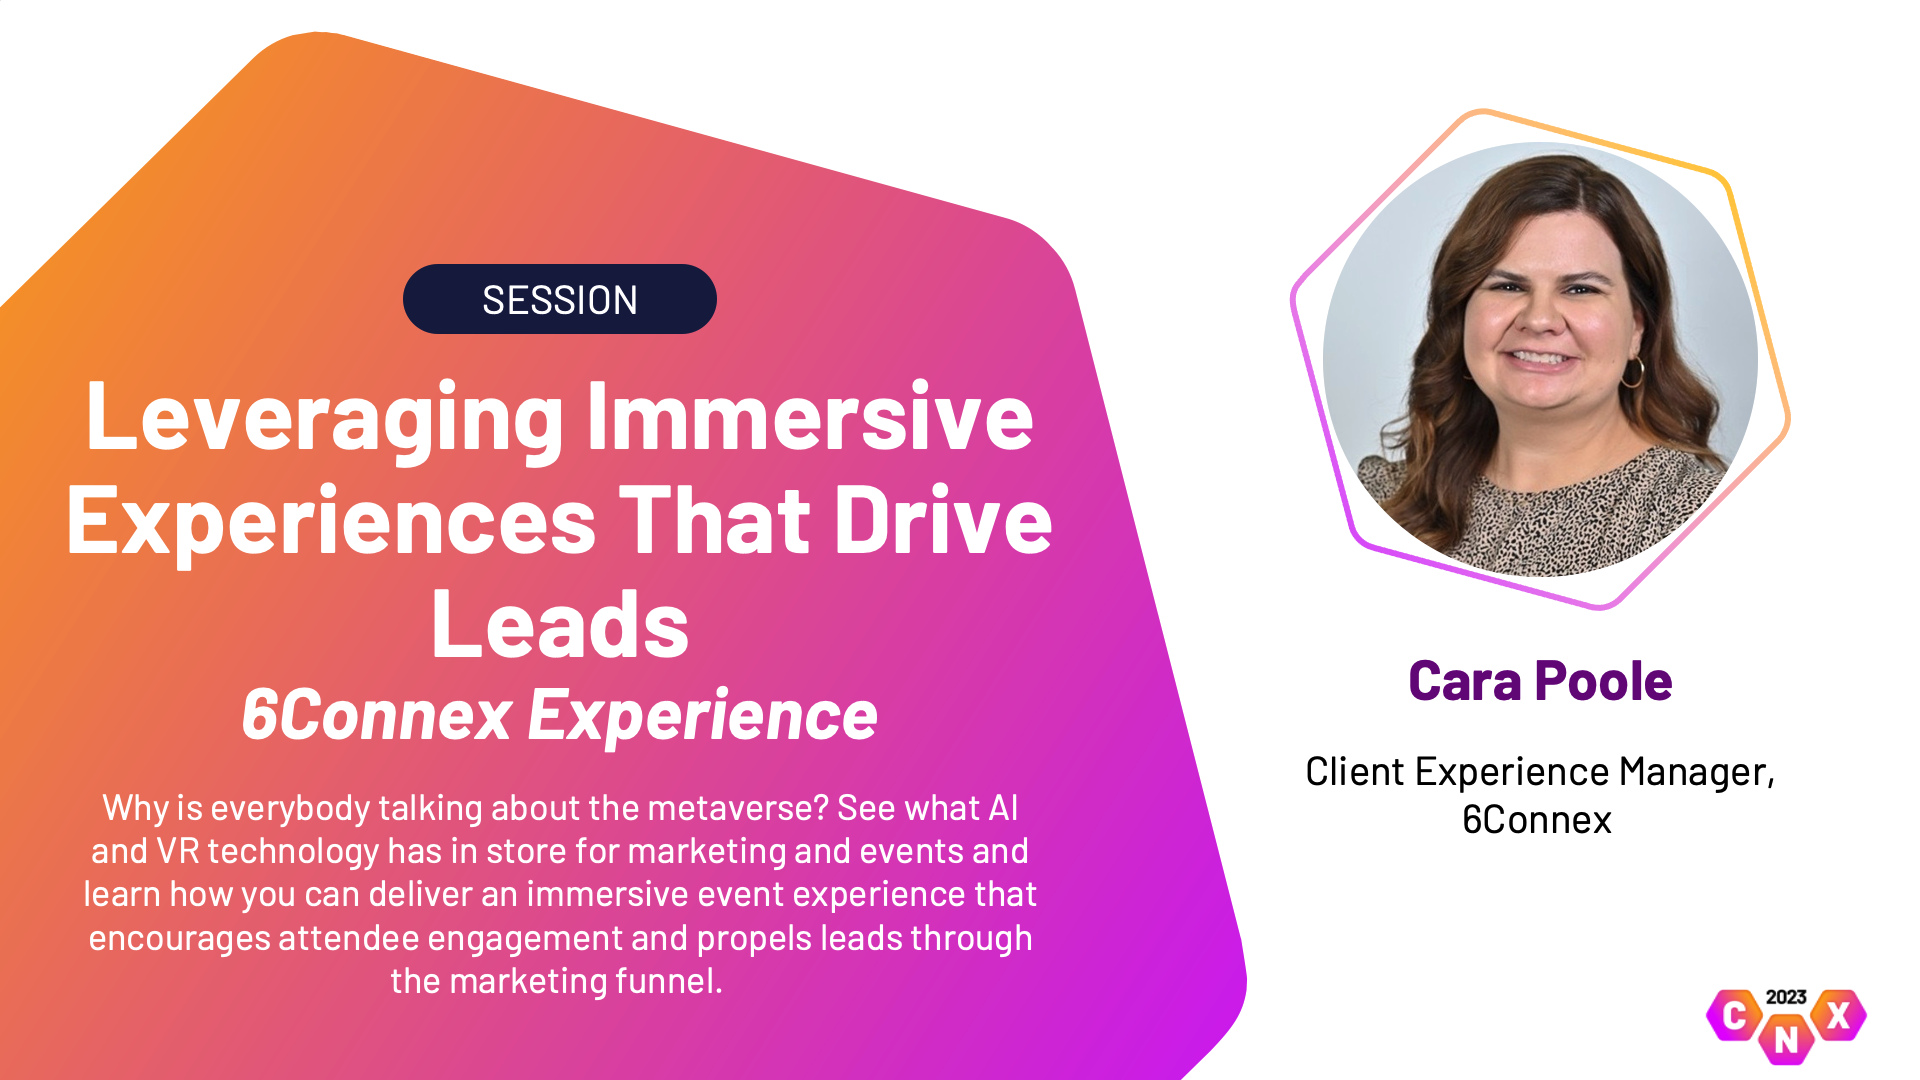 Client Experience Manager from 6Connex talks about AI technology and lead generation in events